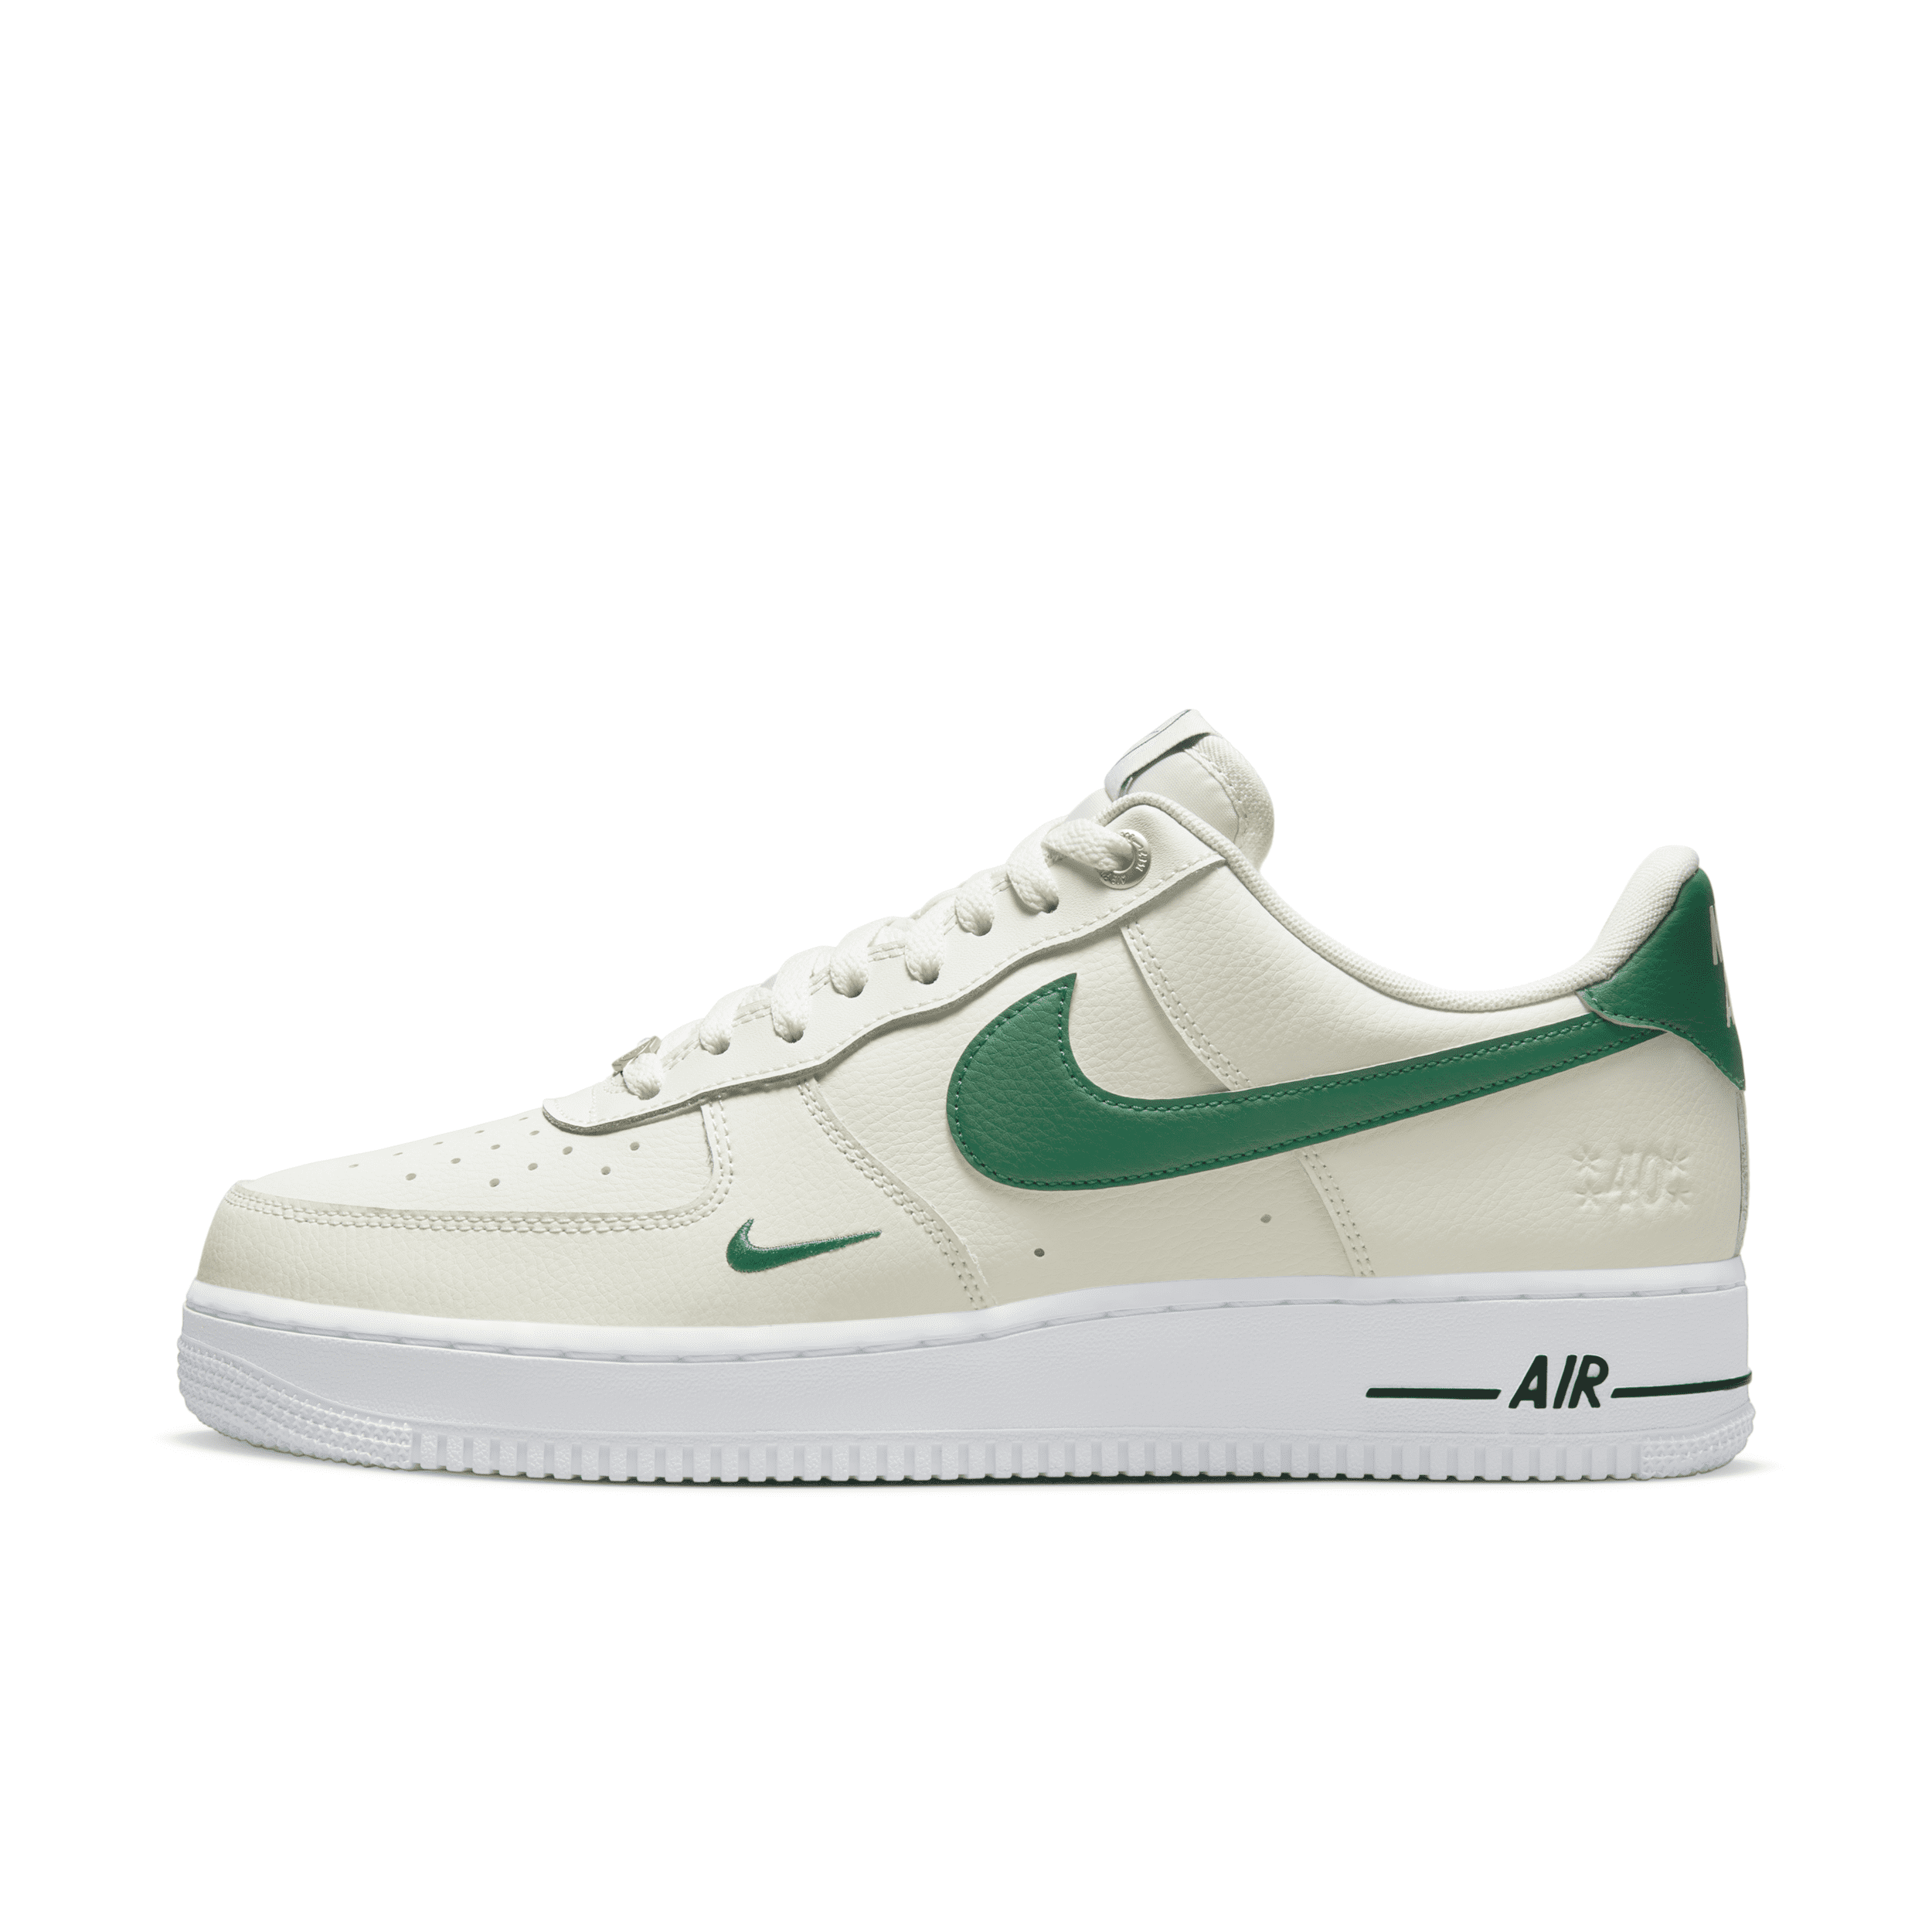 NIKE MEN'S AIR FORCE 1 '07 LV8 SHOES,14244621